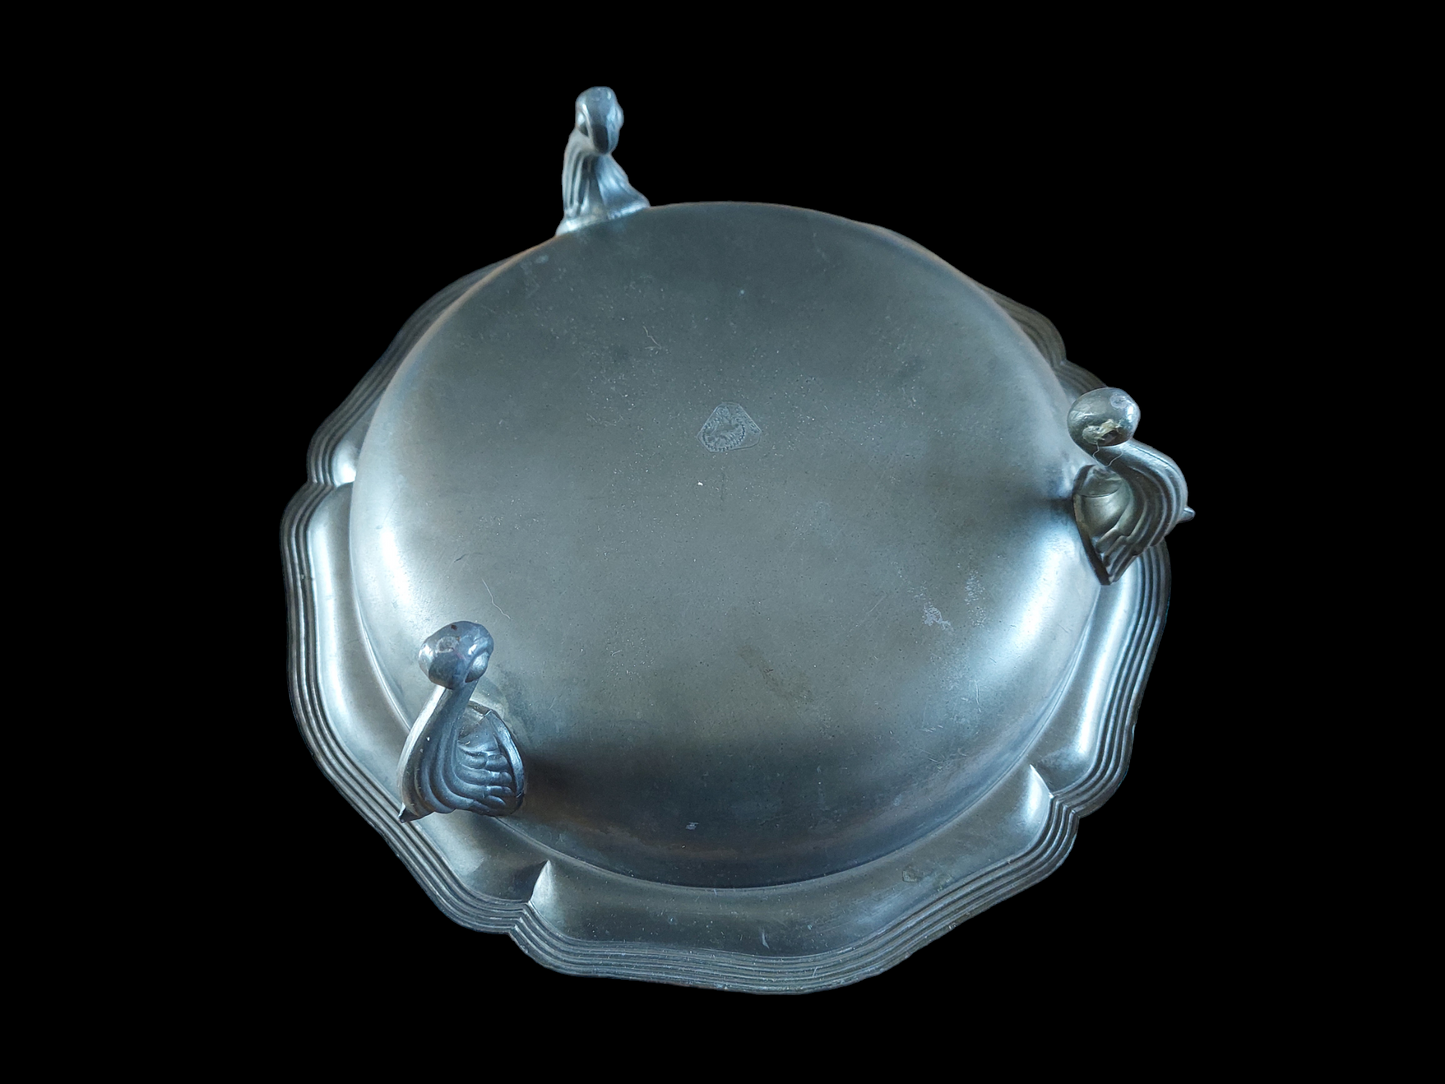 Pewter bowl for burning incense or herbs